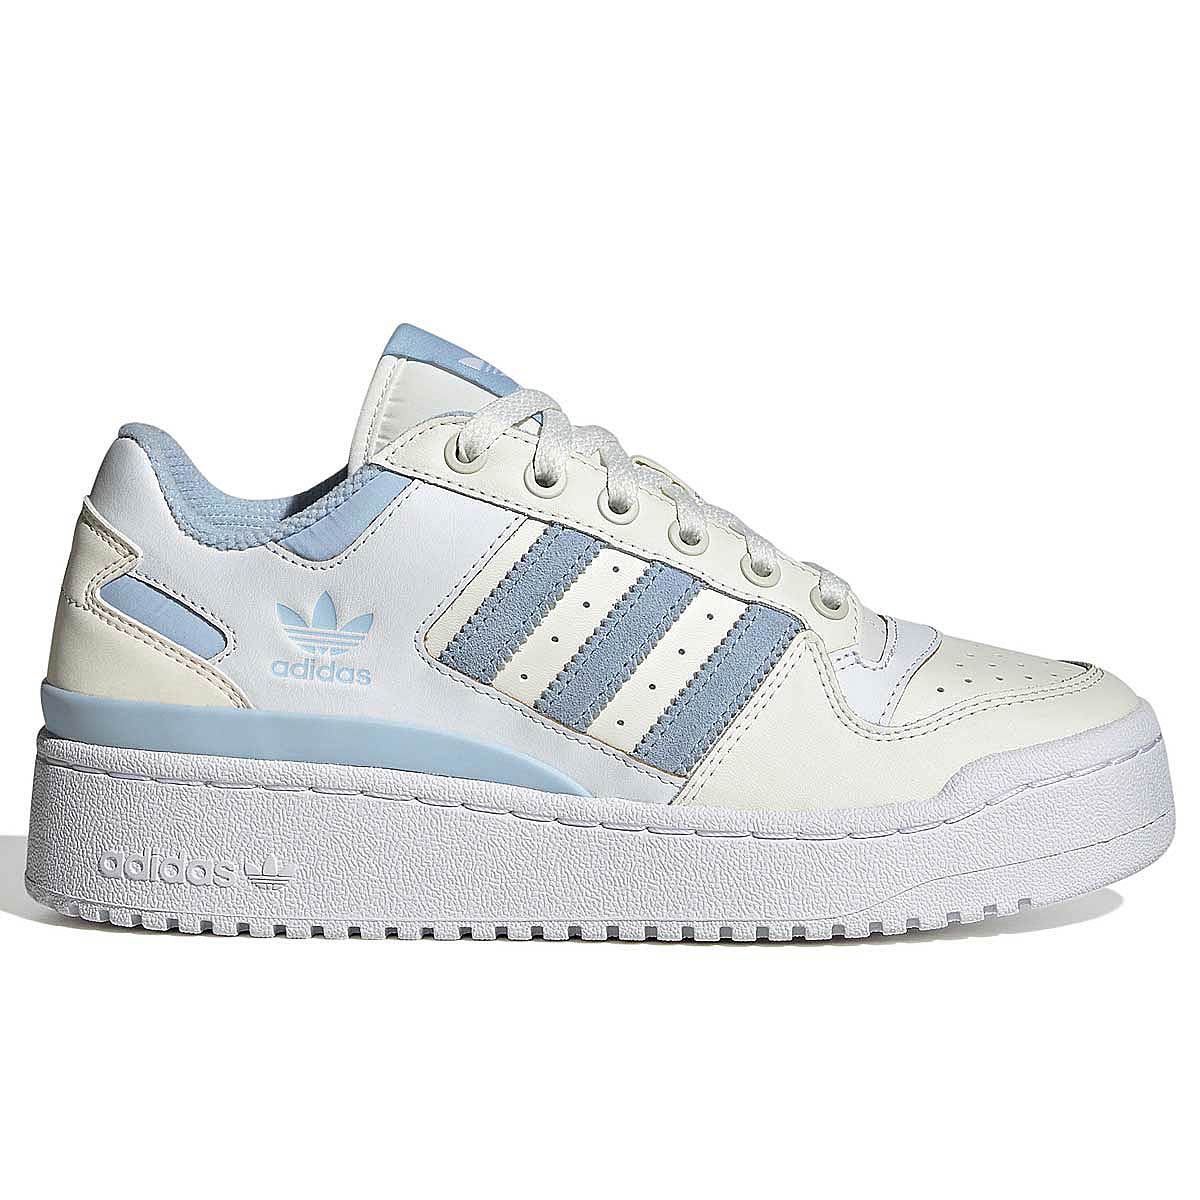 Image of Adidas Forum Bold Stripes, Owhite/clesky/ftwwht